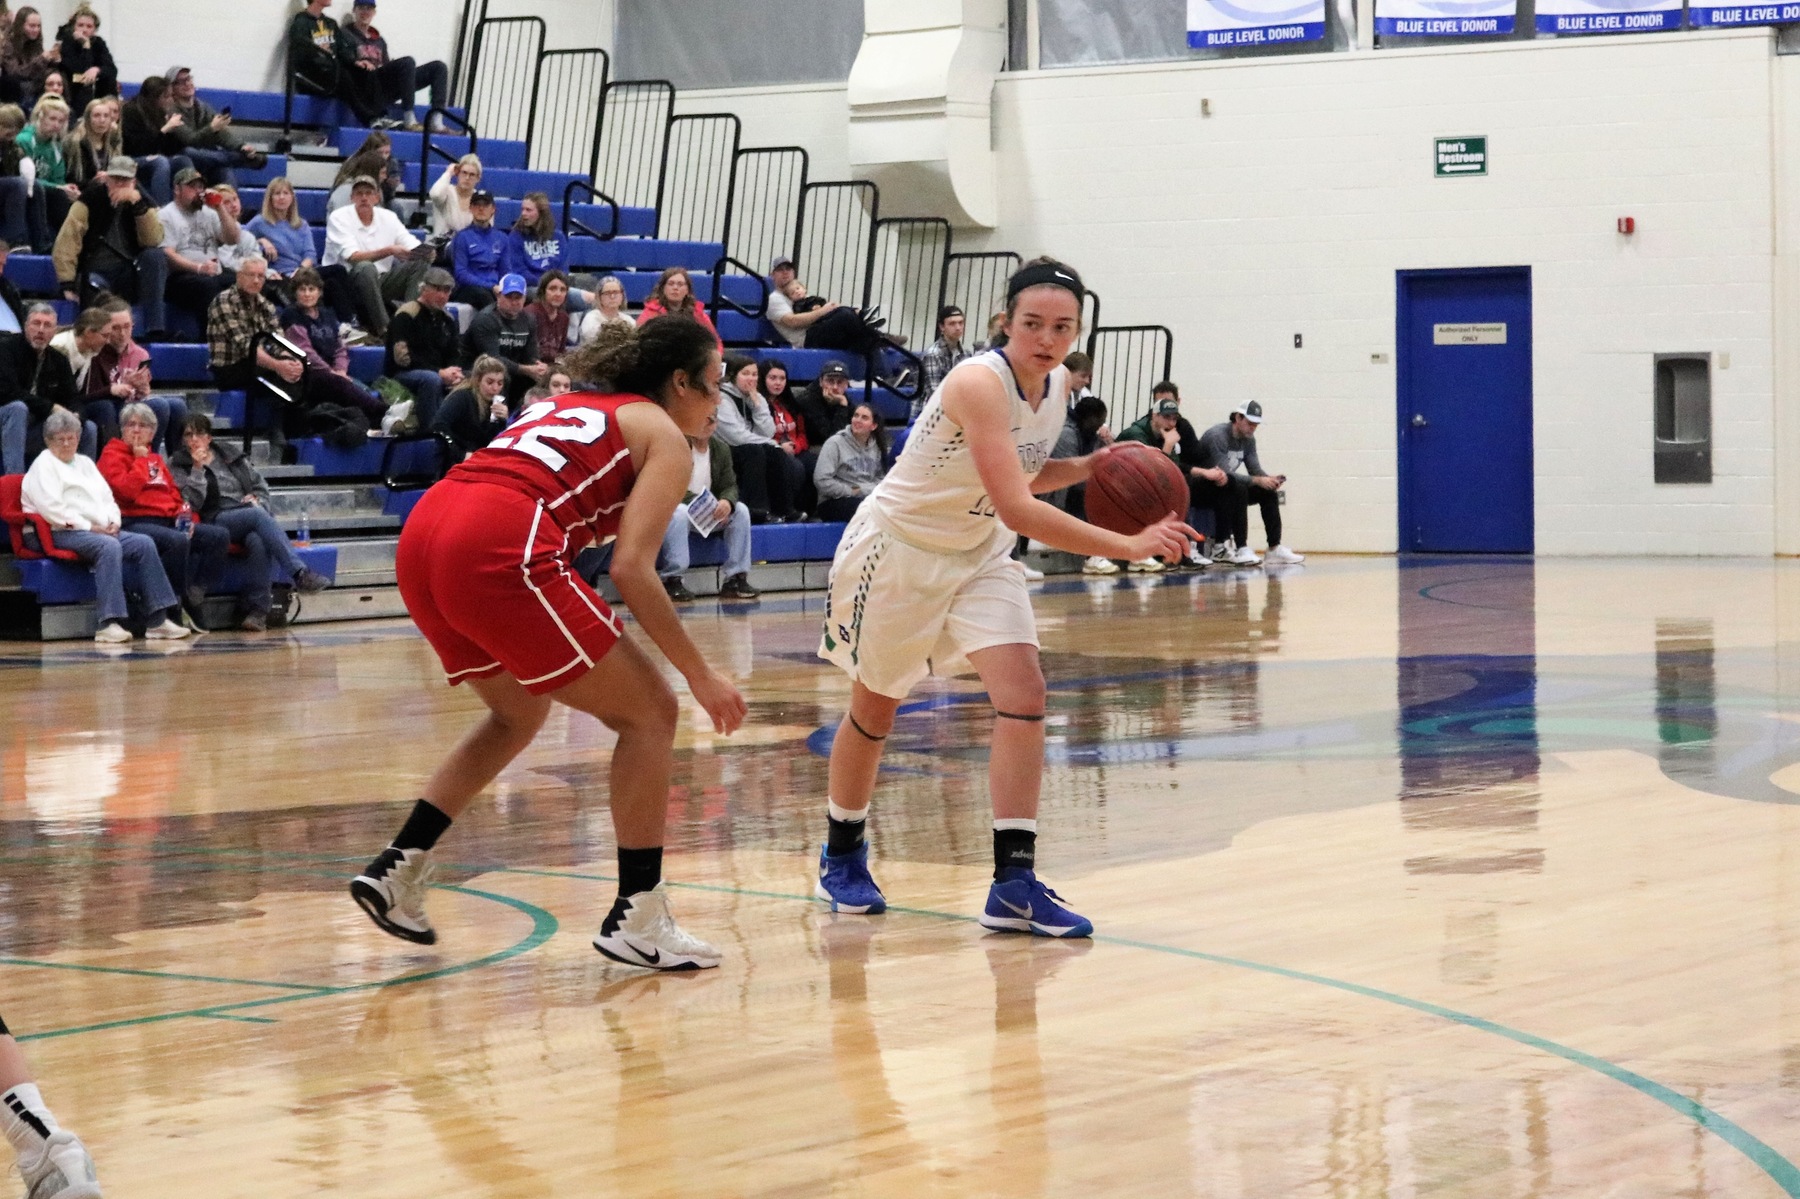 Kaitlyn Hardwick dribbles to her left, a defender close by